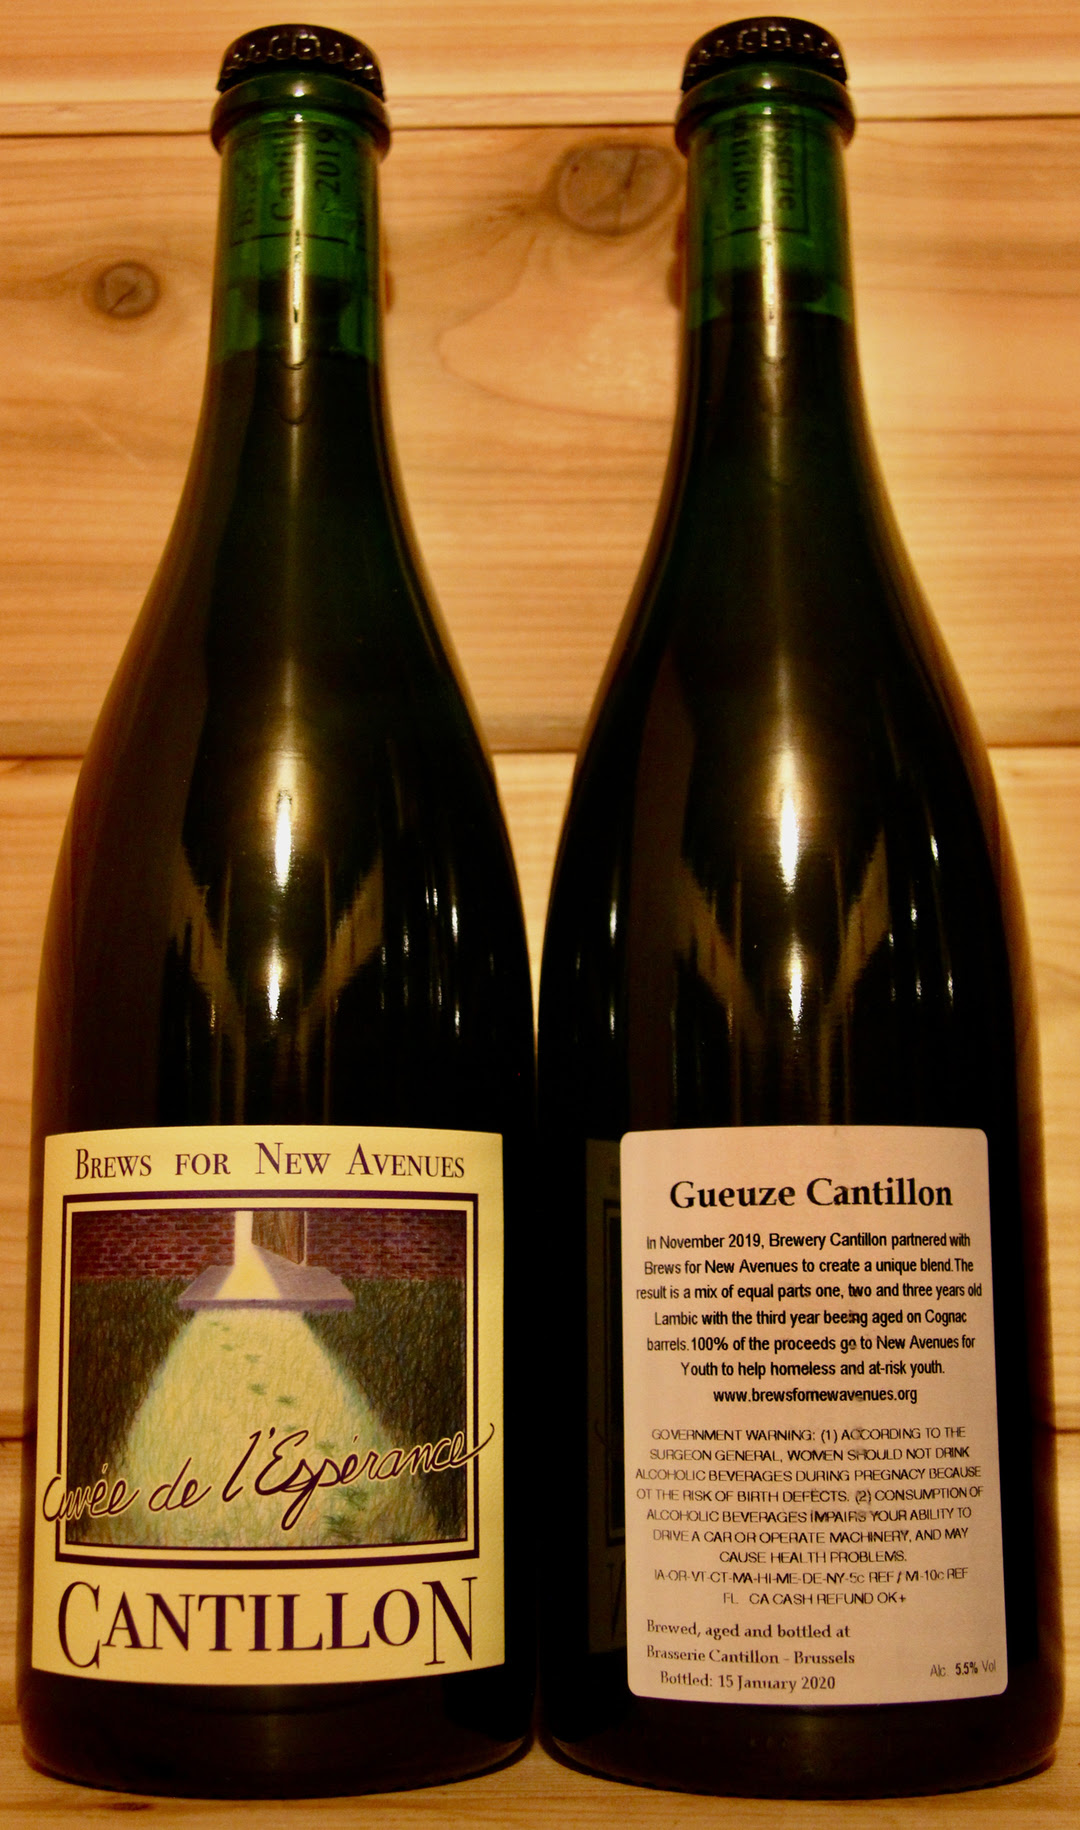 image of Brews For New Avenues Cantillon Cuvée de l’Espérance Auction courtesy of Brews For New Avenues